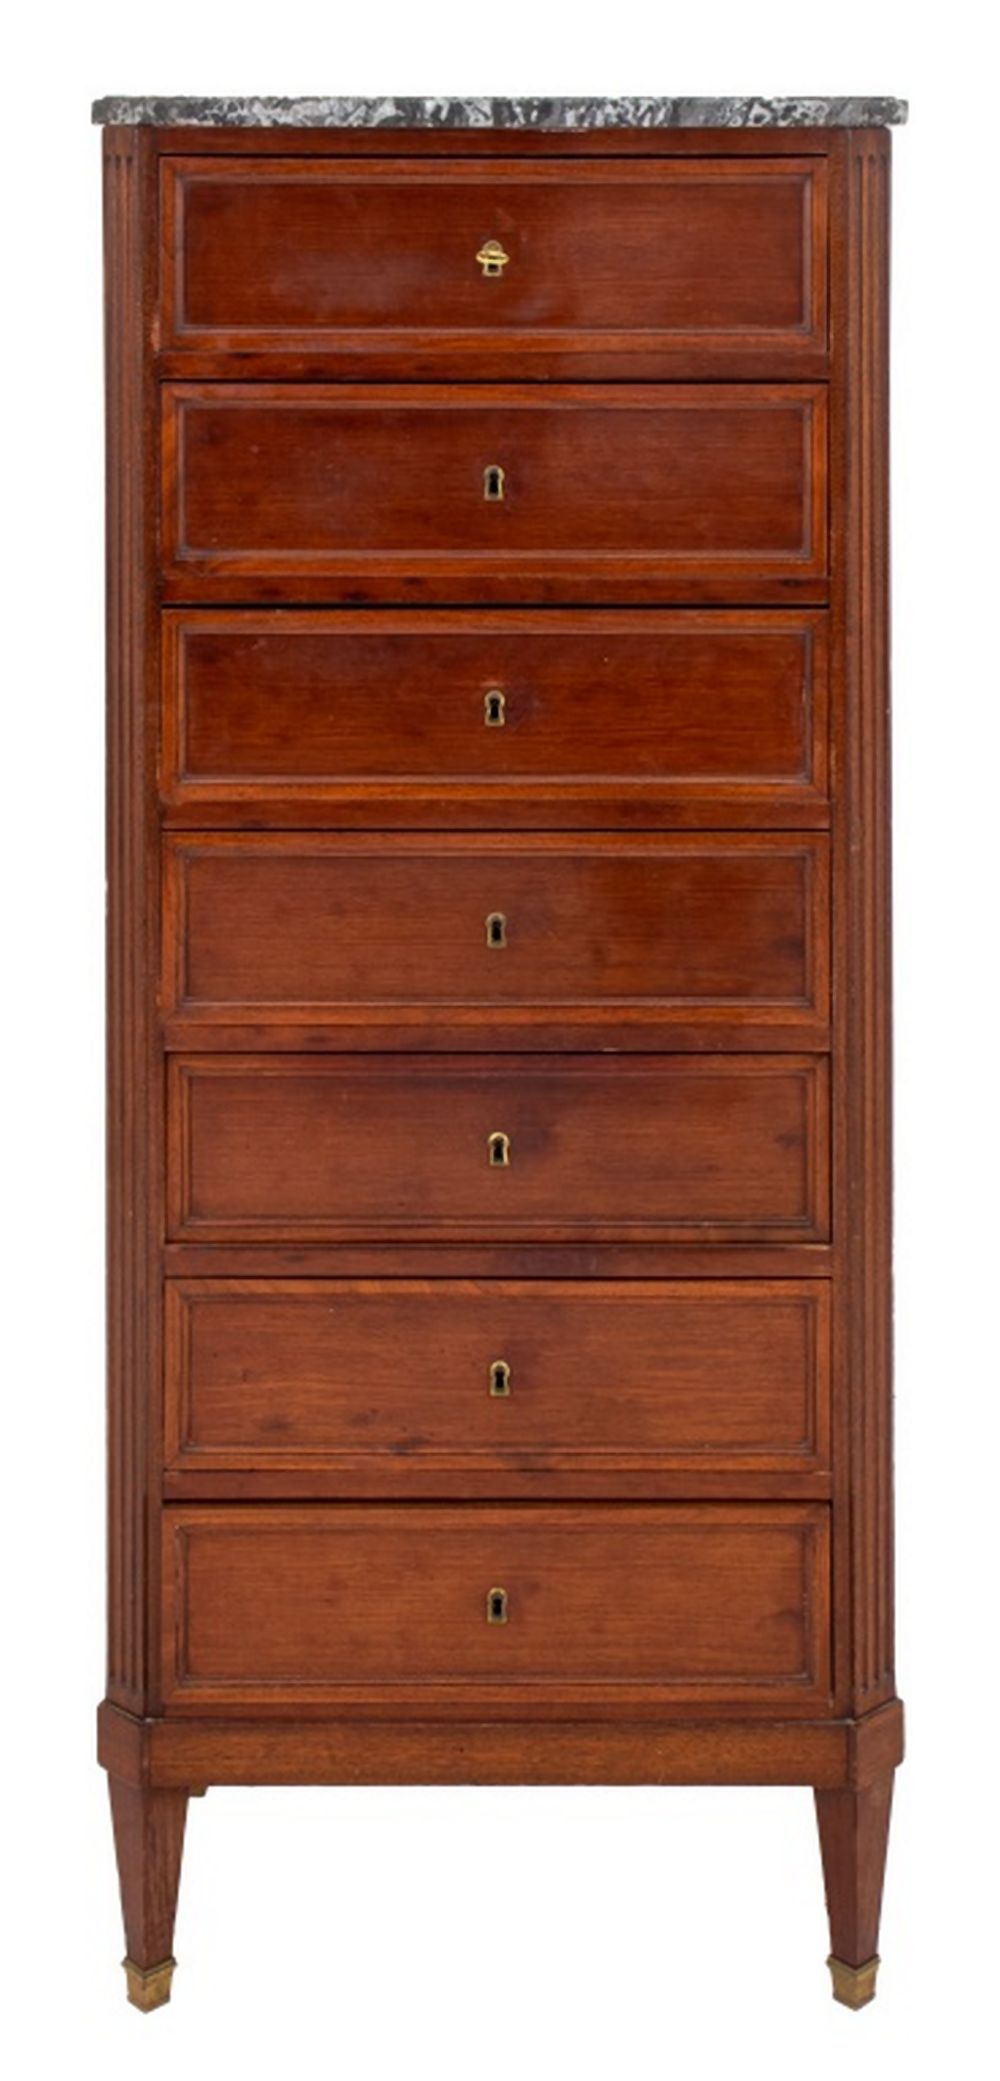 FRENCH LOUIS XVI STYLE TALL DRESSER